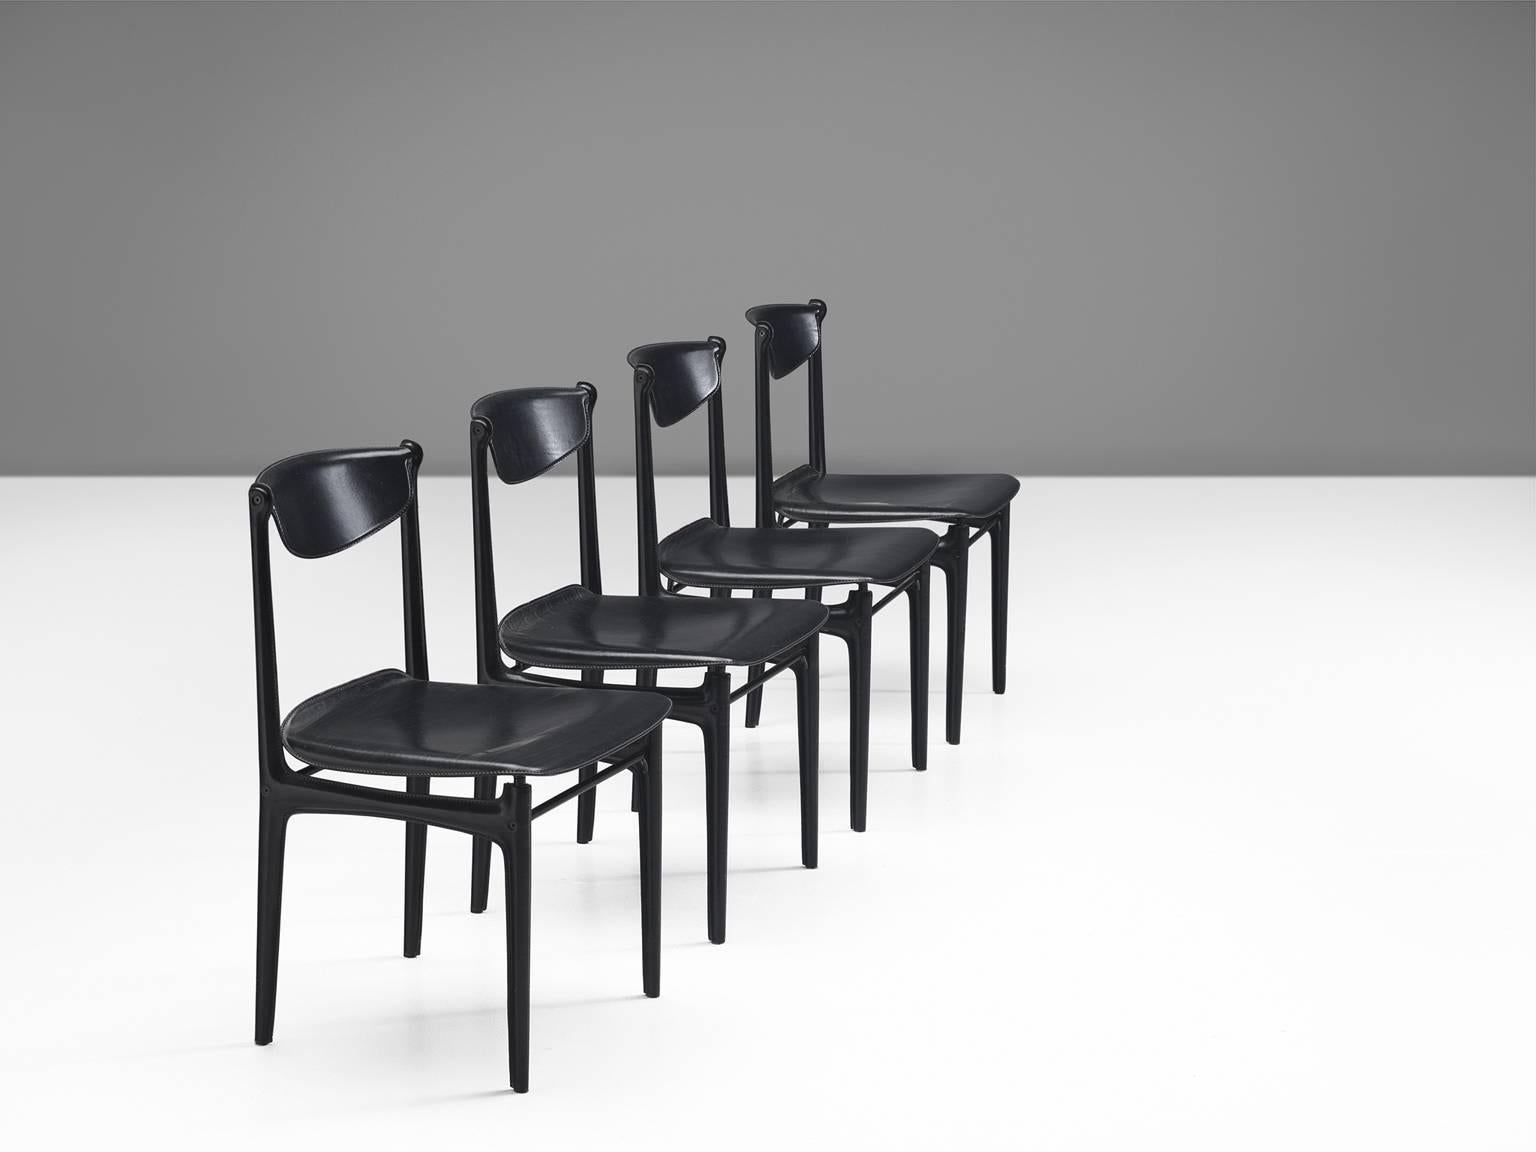 Set of four chairs by Matteo Grassi in leather and metal, Italy, 1960s.

Delicate set of four leather dining chairs. These chairs consist of a metal frame wrapped in black leather. The frame is modest and frail. With the leather 'upholstery', the